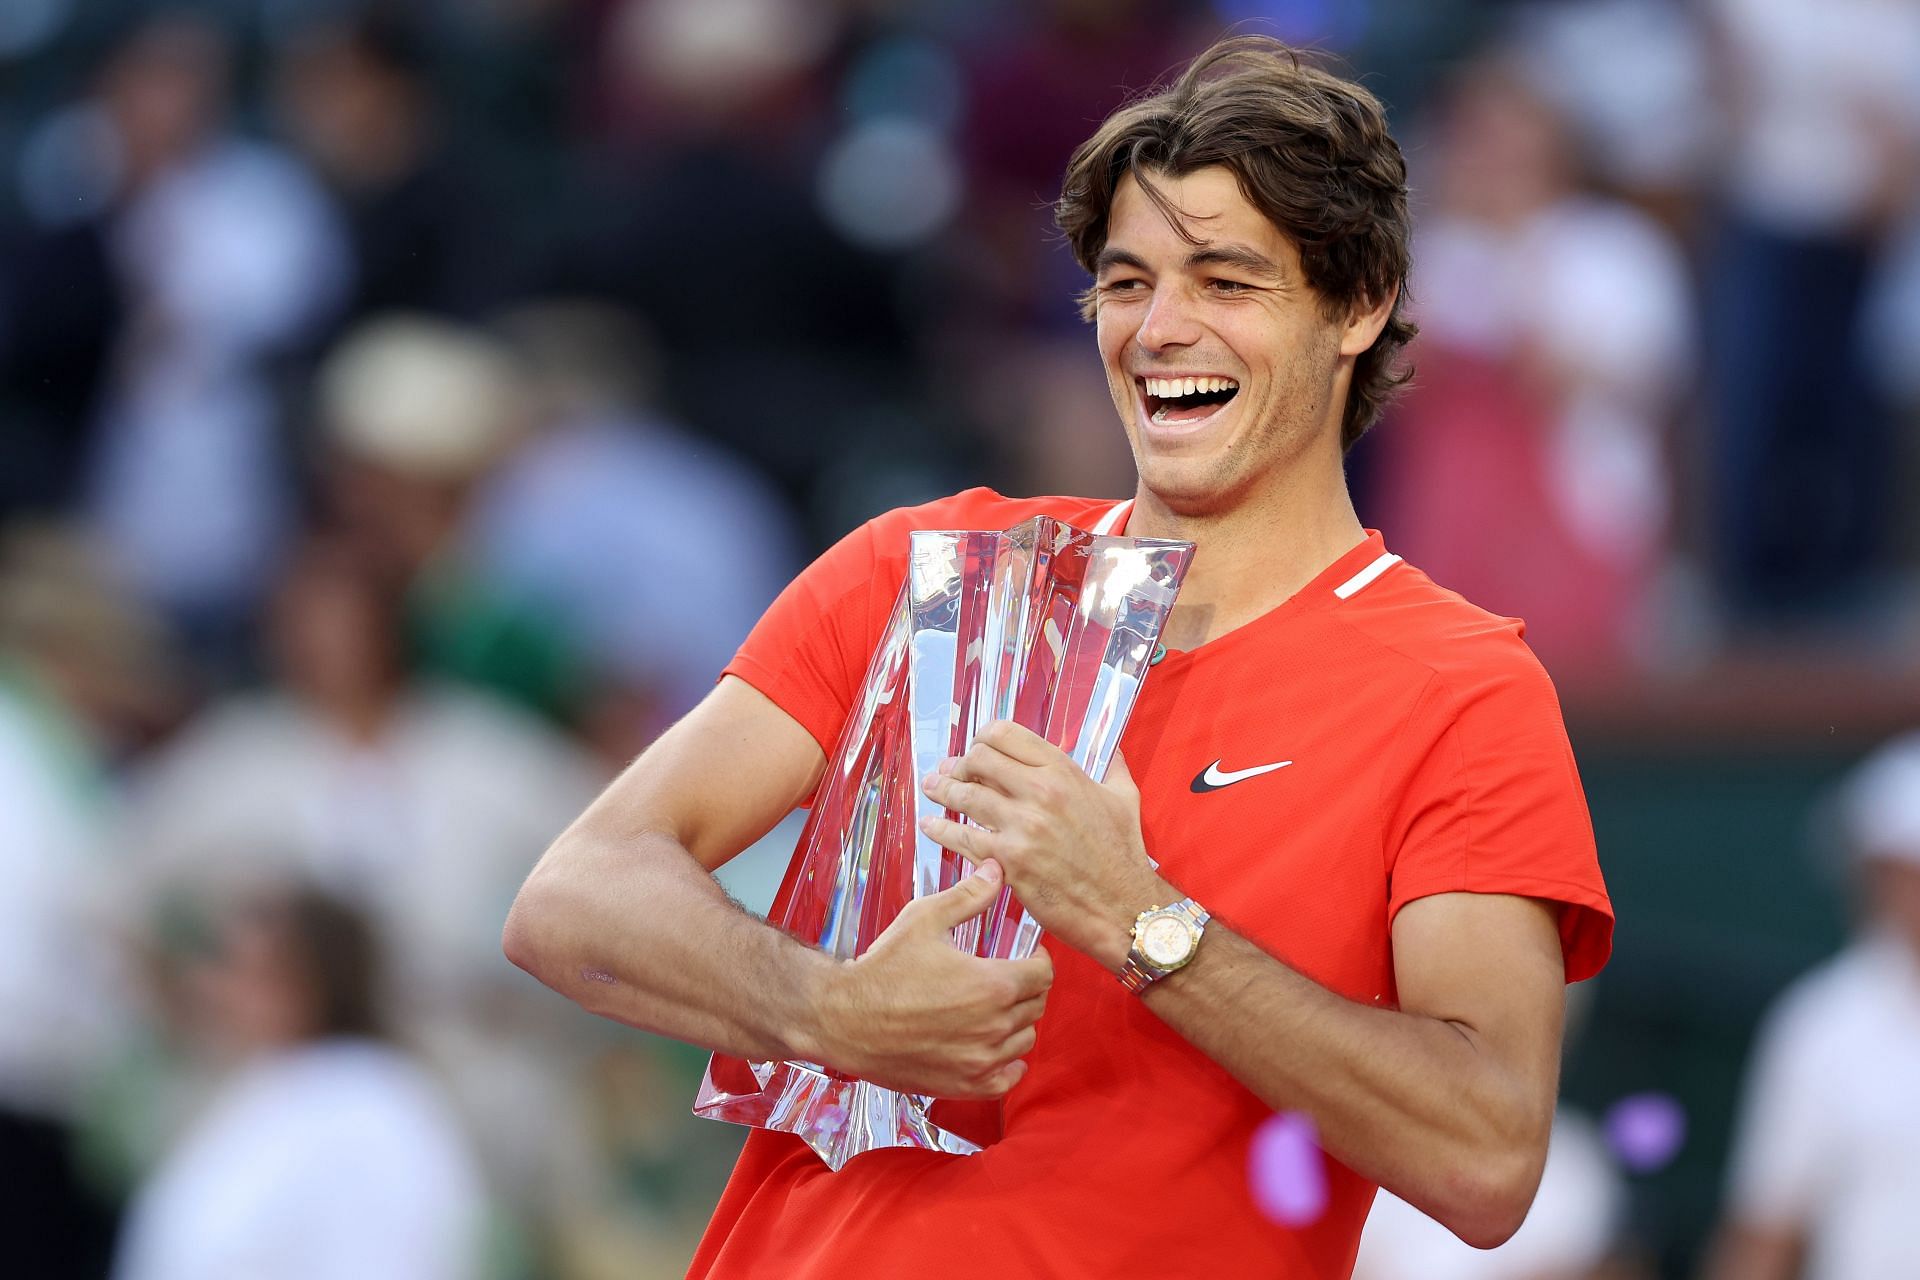 Taylor Fritz won the 2022 Indian Wells Masters to achieve a few important milestones